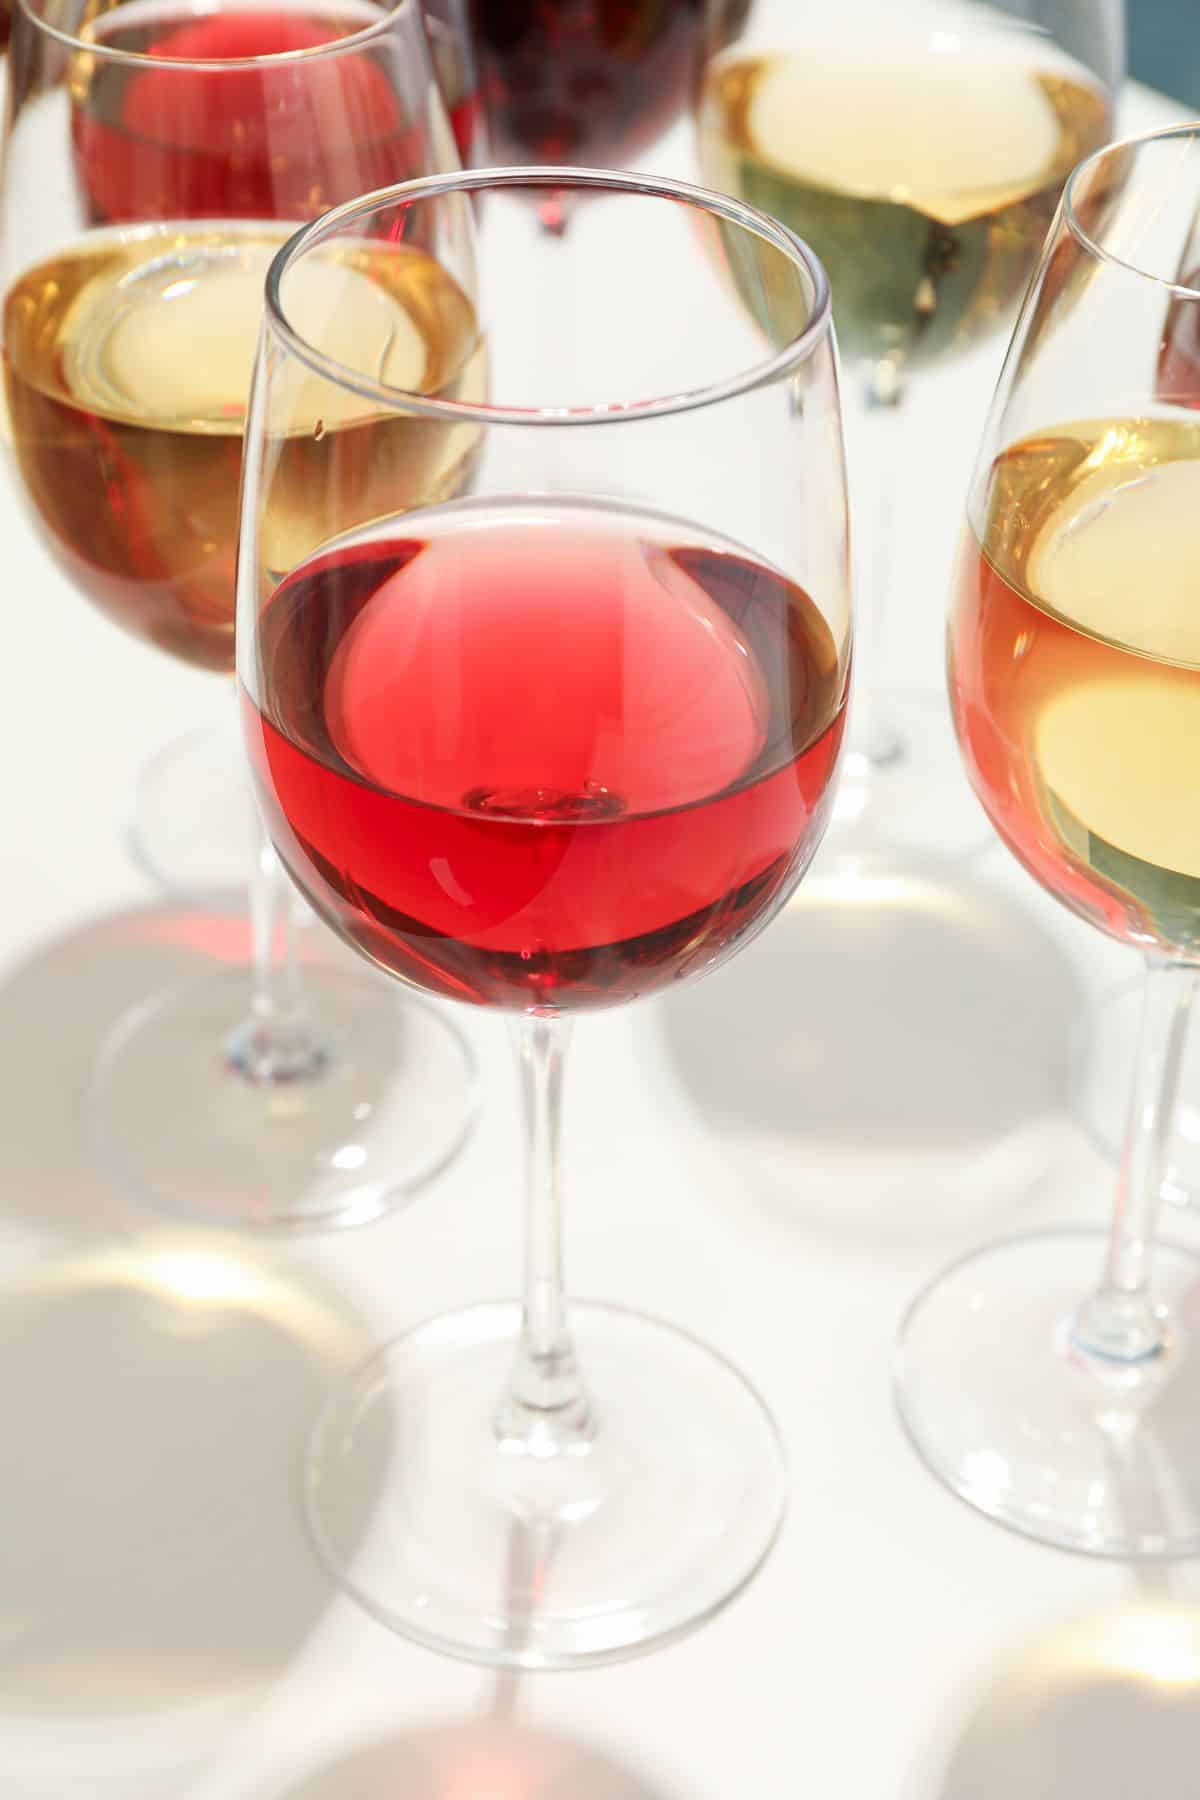 Several glasses of wine and red white on a white tabletop.